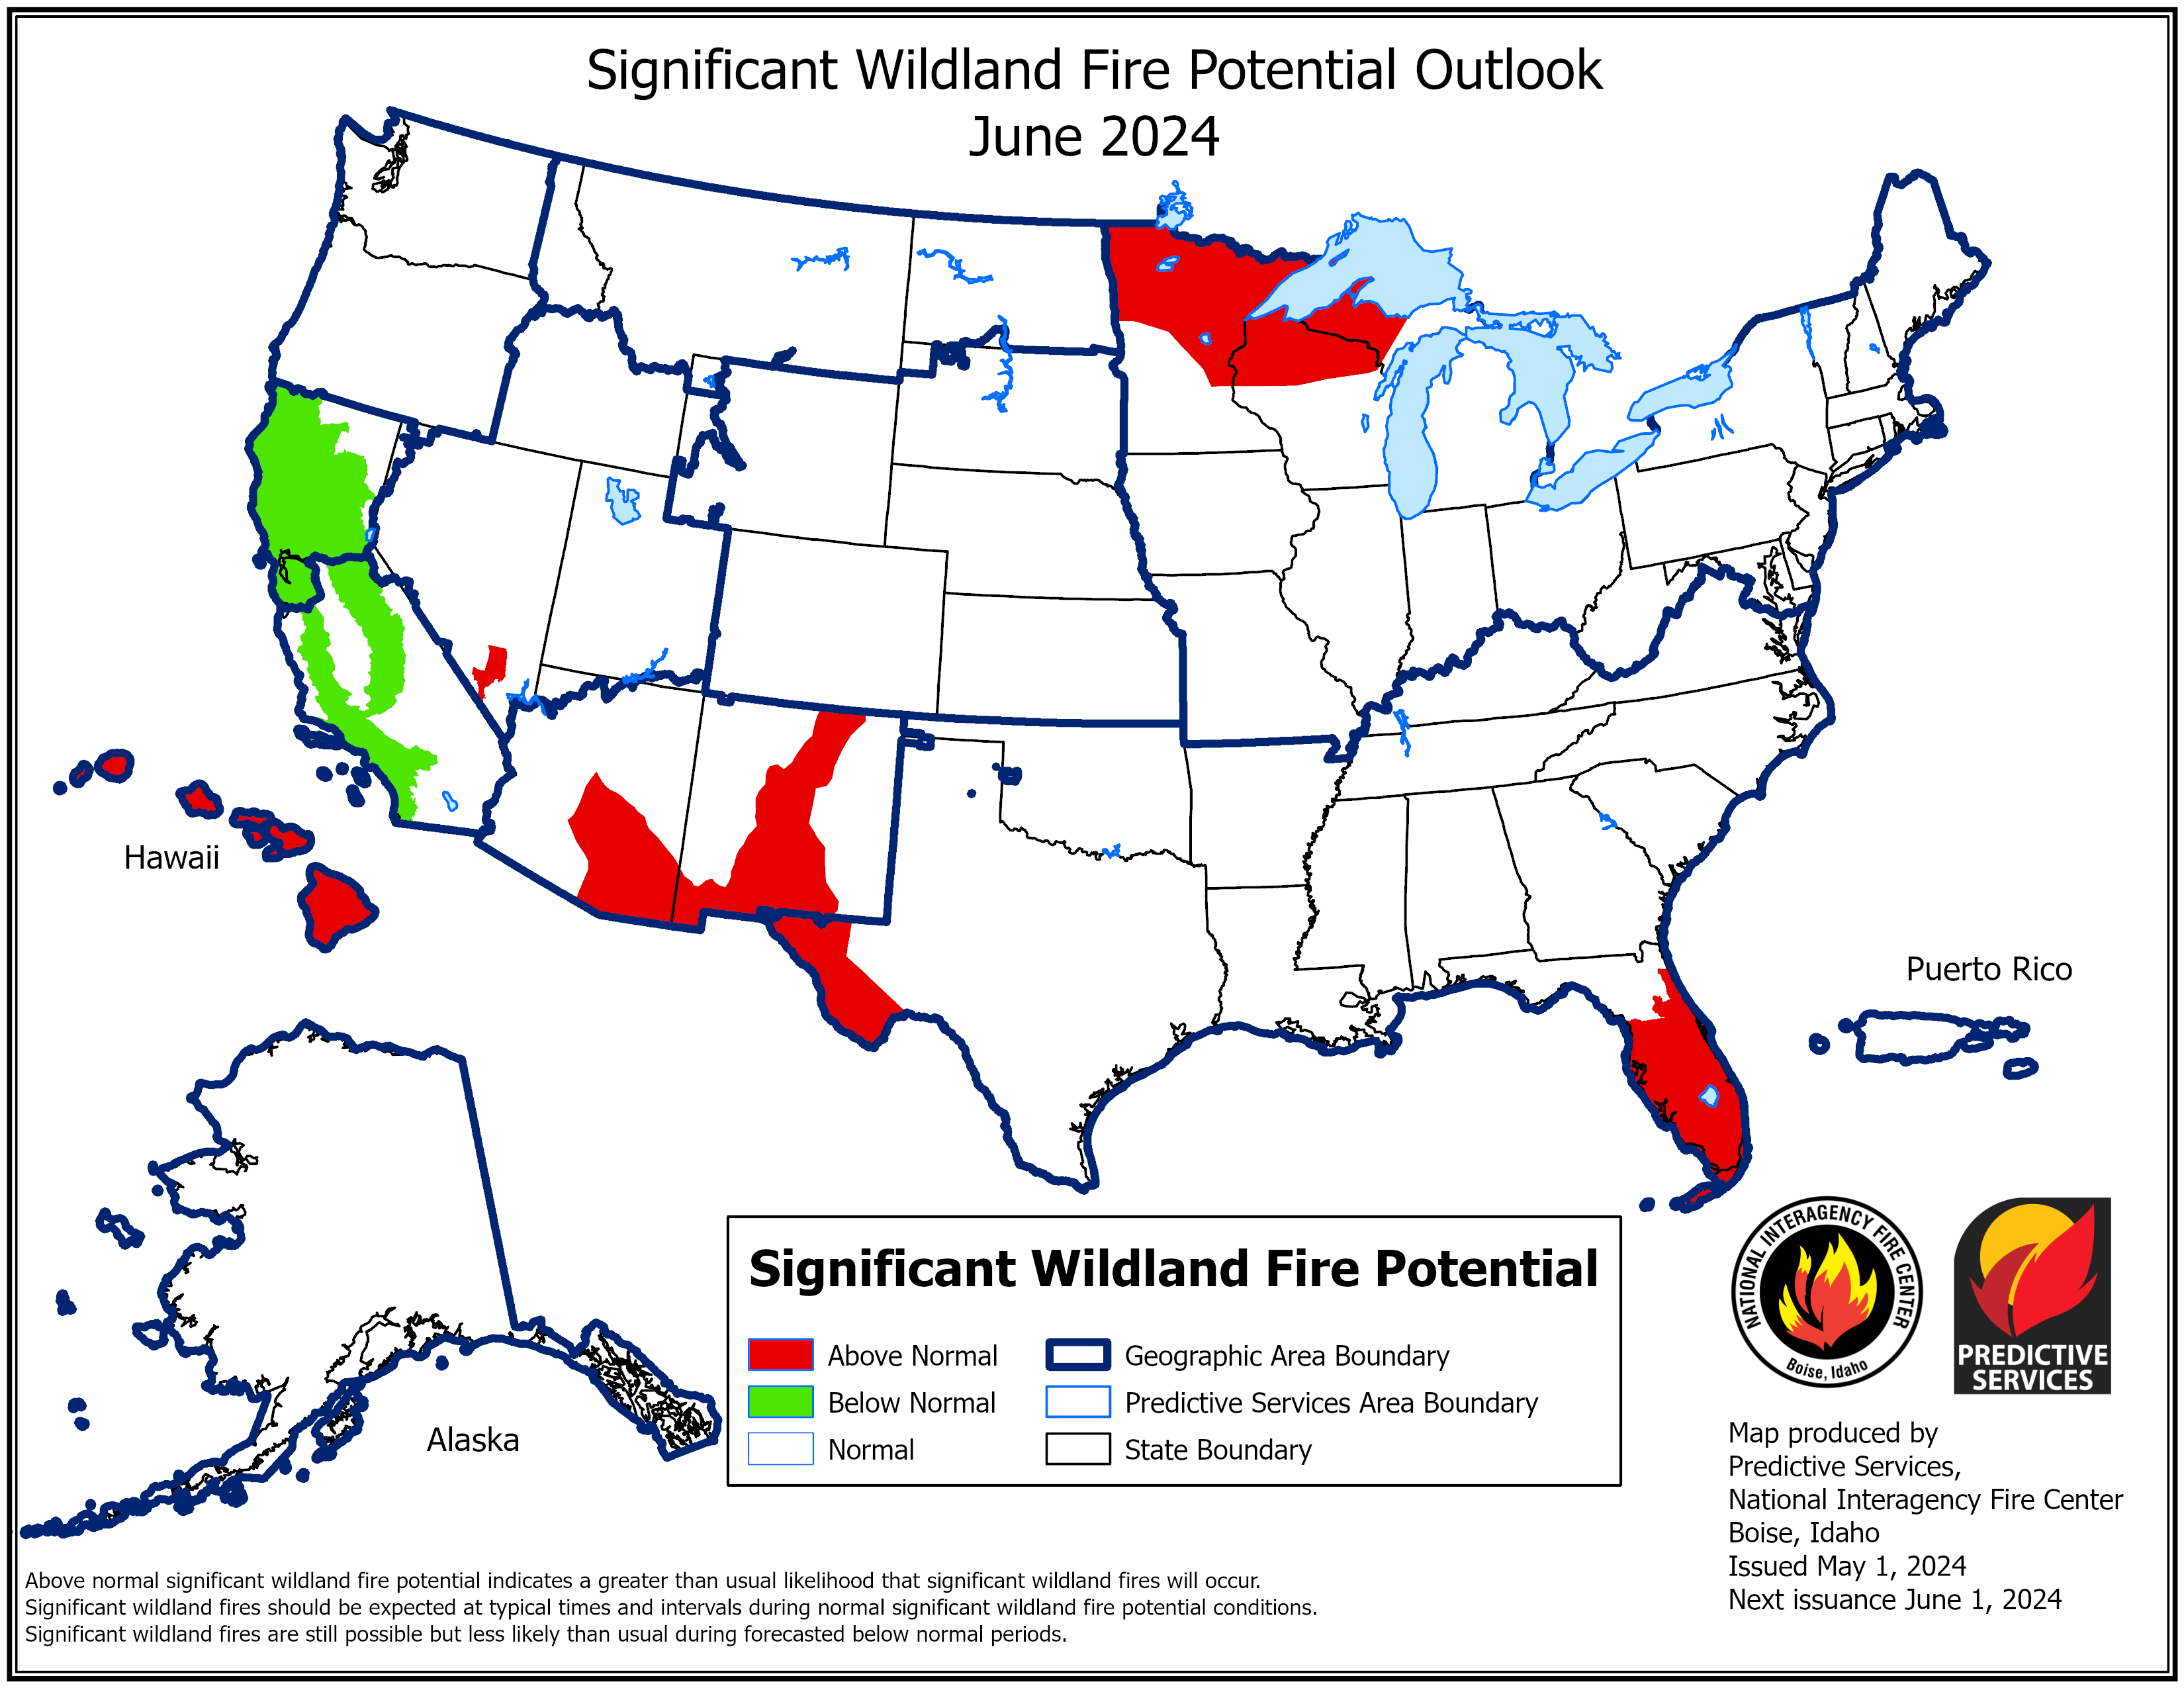 Map of significant fire potential for the US for June